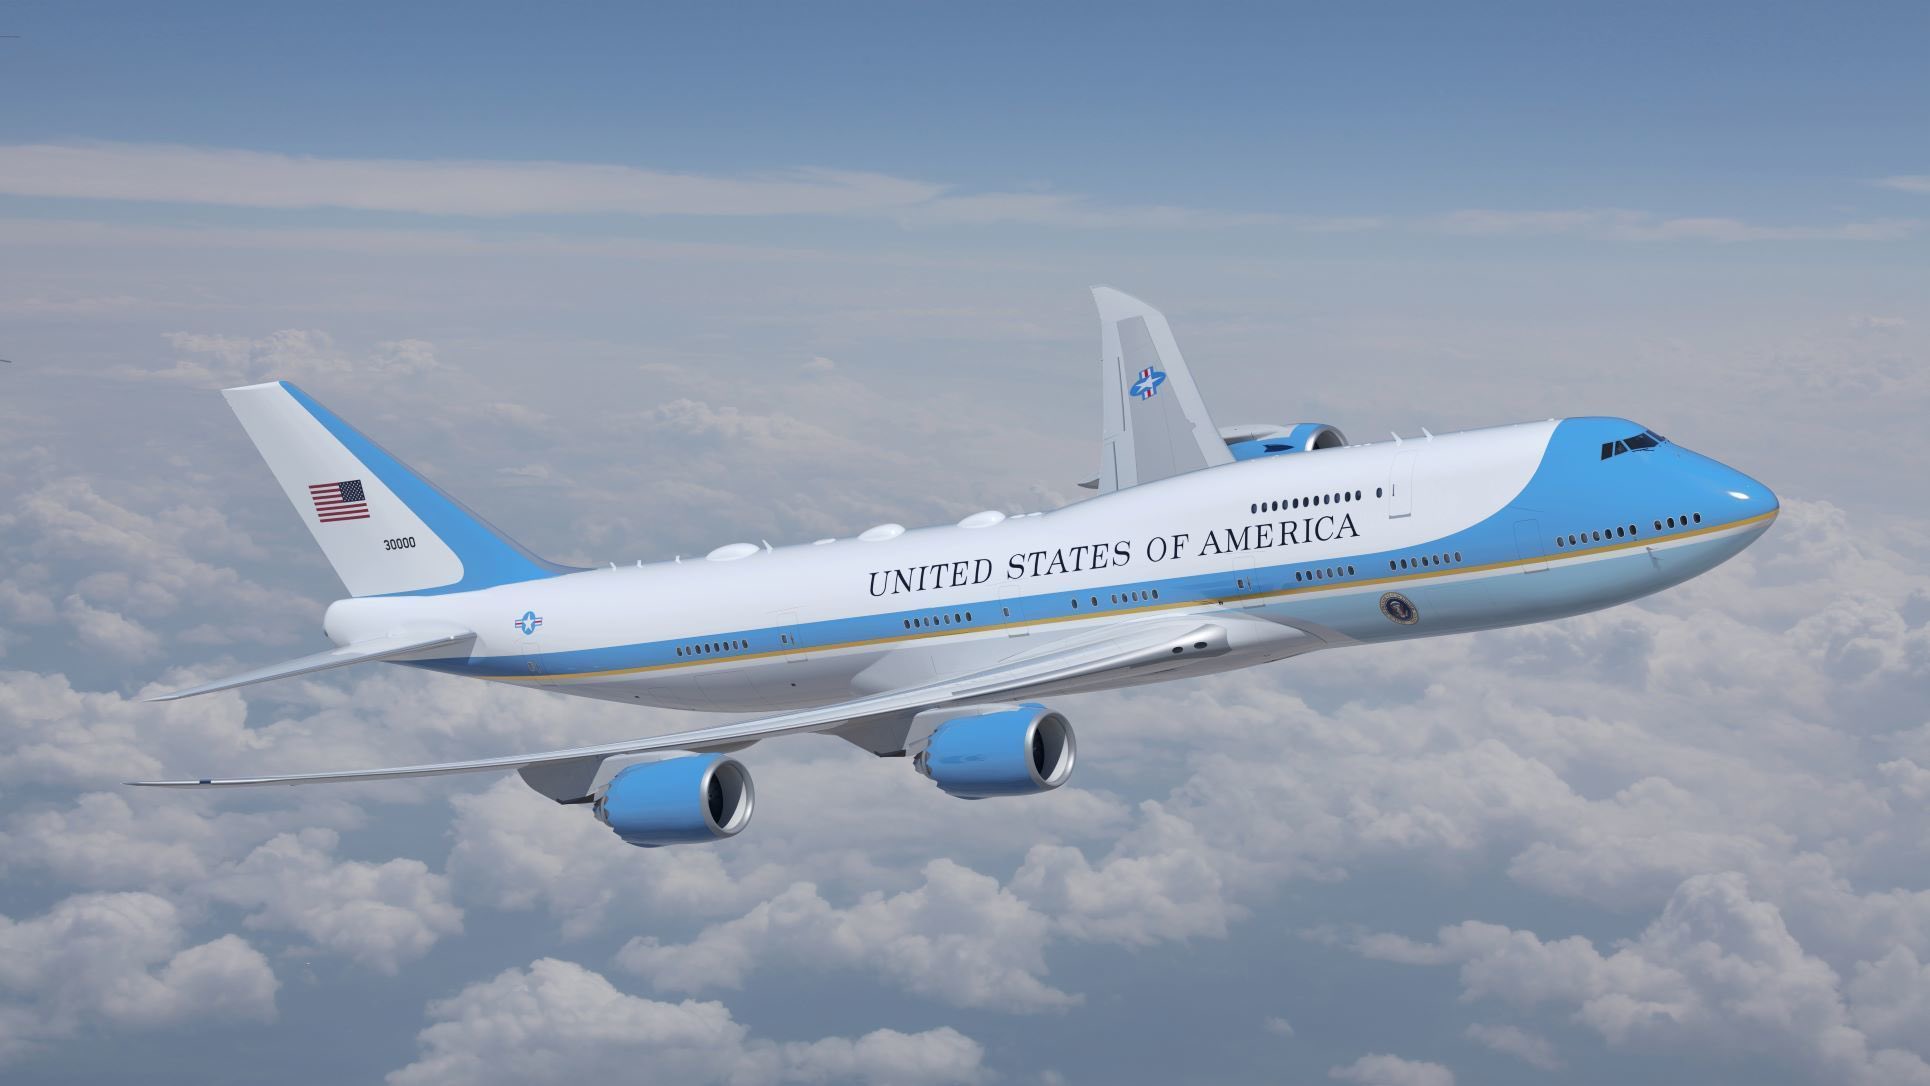 President Biden selected the livery of  the “Next Air Force One,” VC-25B ,  that will  resemble the livery of the current Air Force One